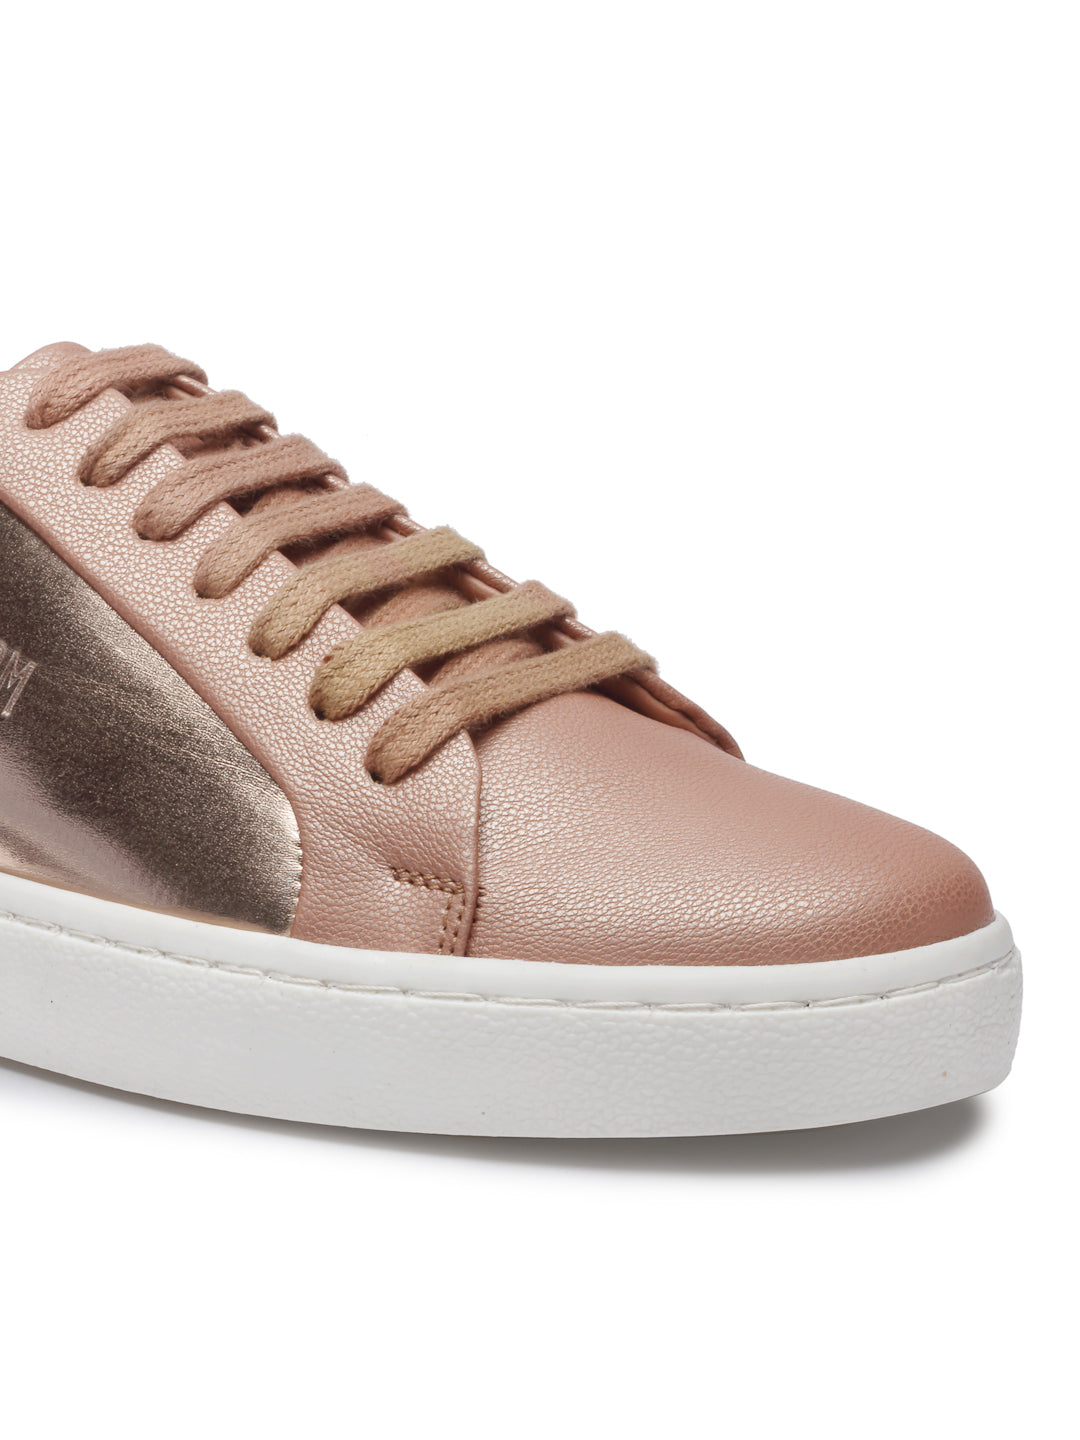 Women's Rose-Pink Synthetic Leather Lace up Casual Sneaker